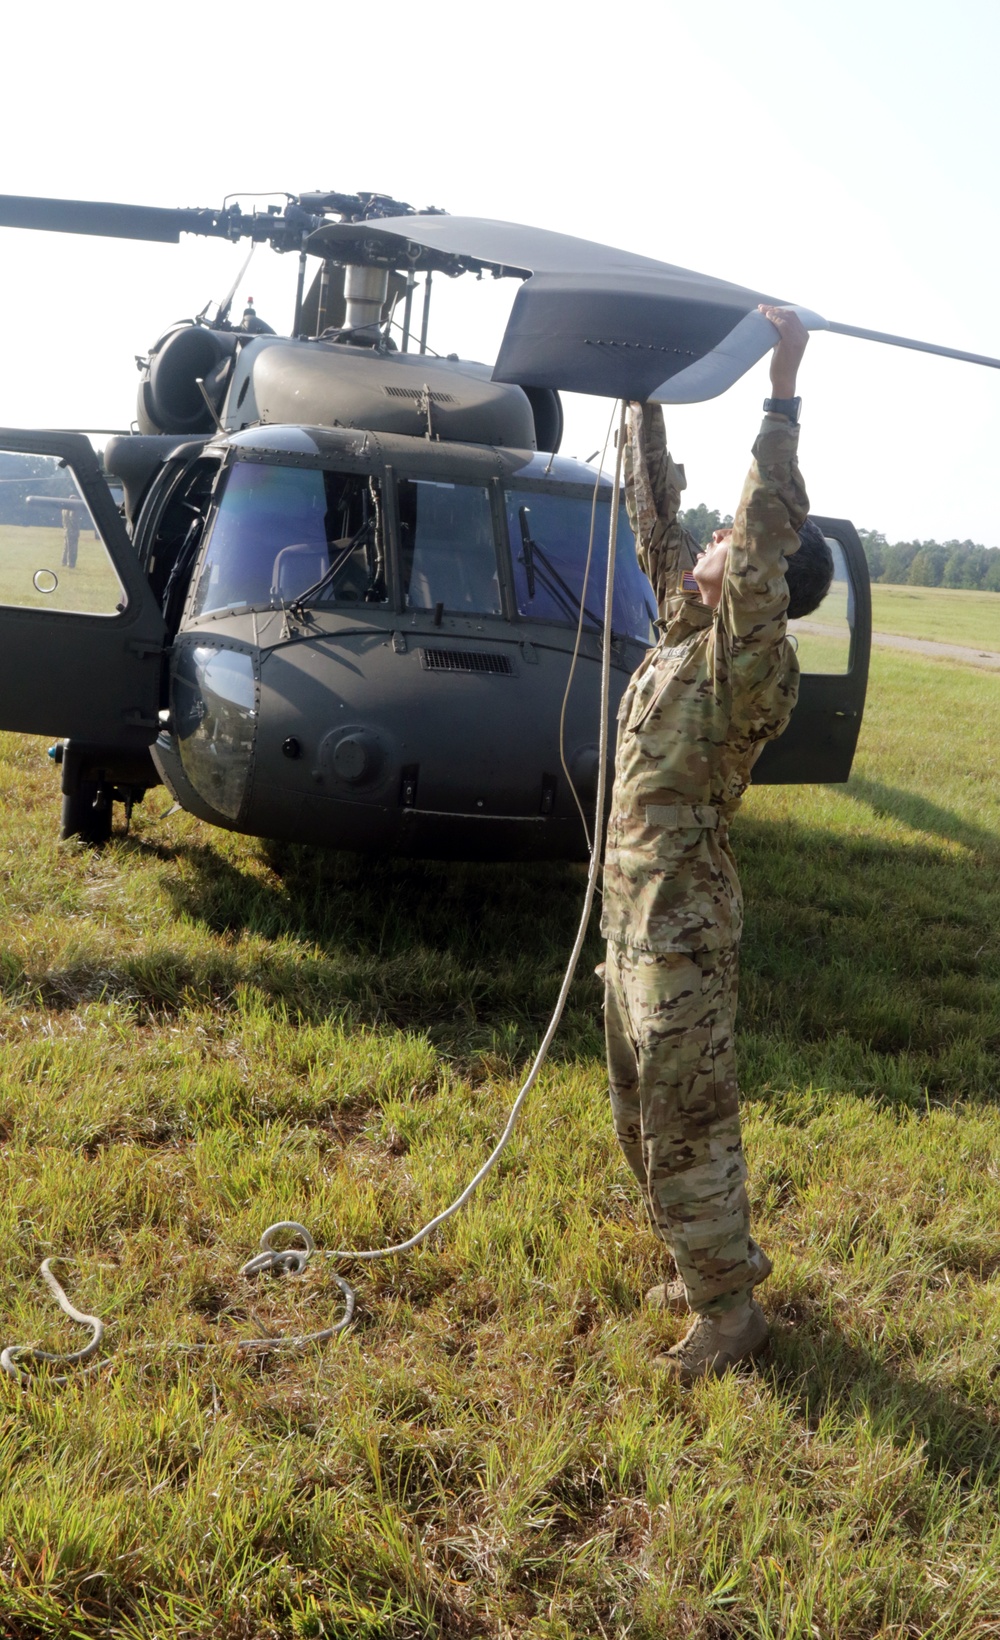 Camp Shelby Safe Haven for Ft. Rucker Aircraft